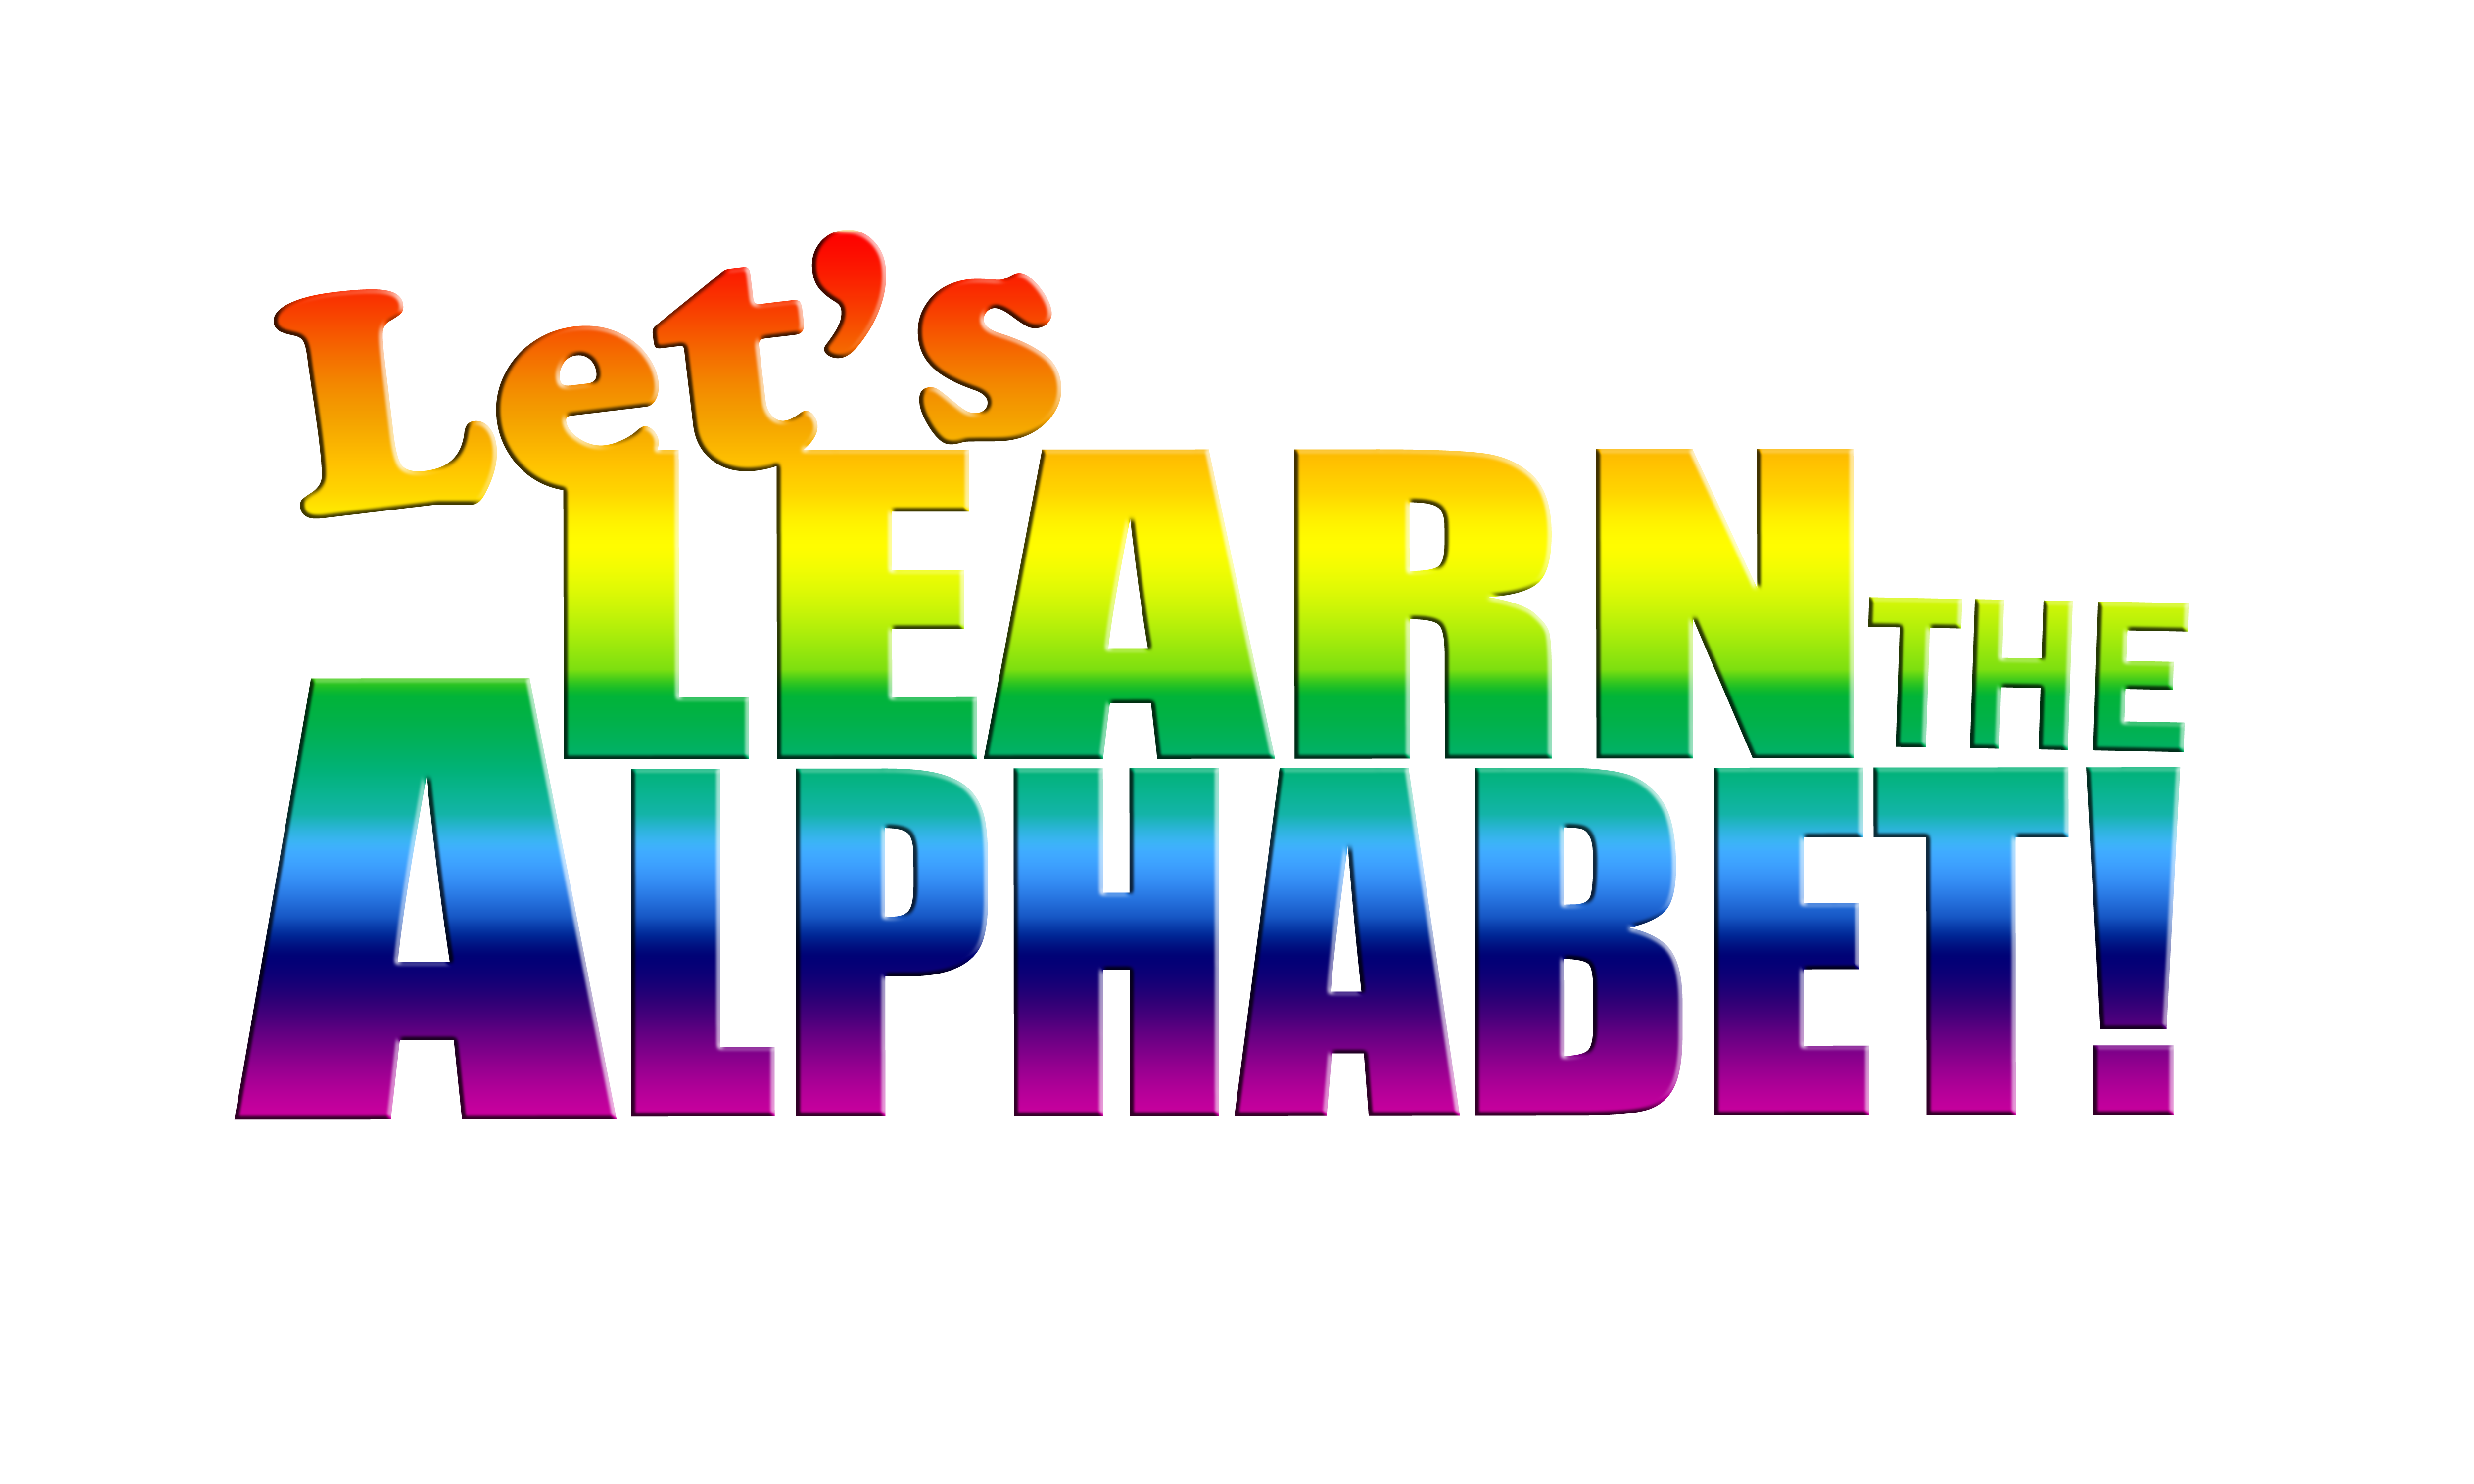 LET’S LEARN THE ALPHABET by julespatrick.crytel